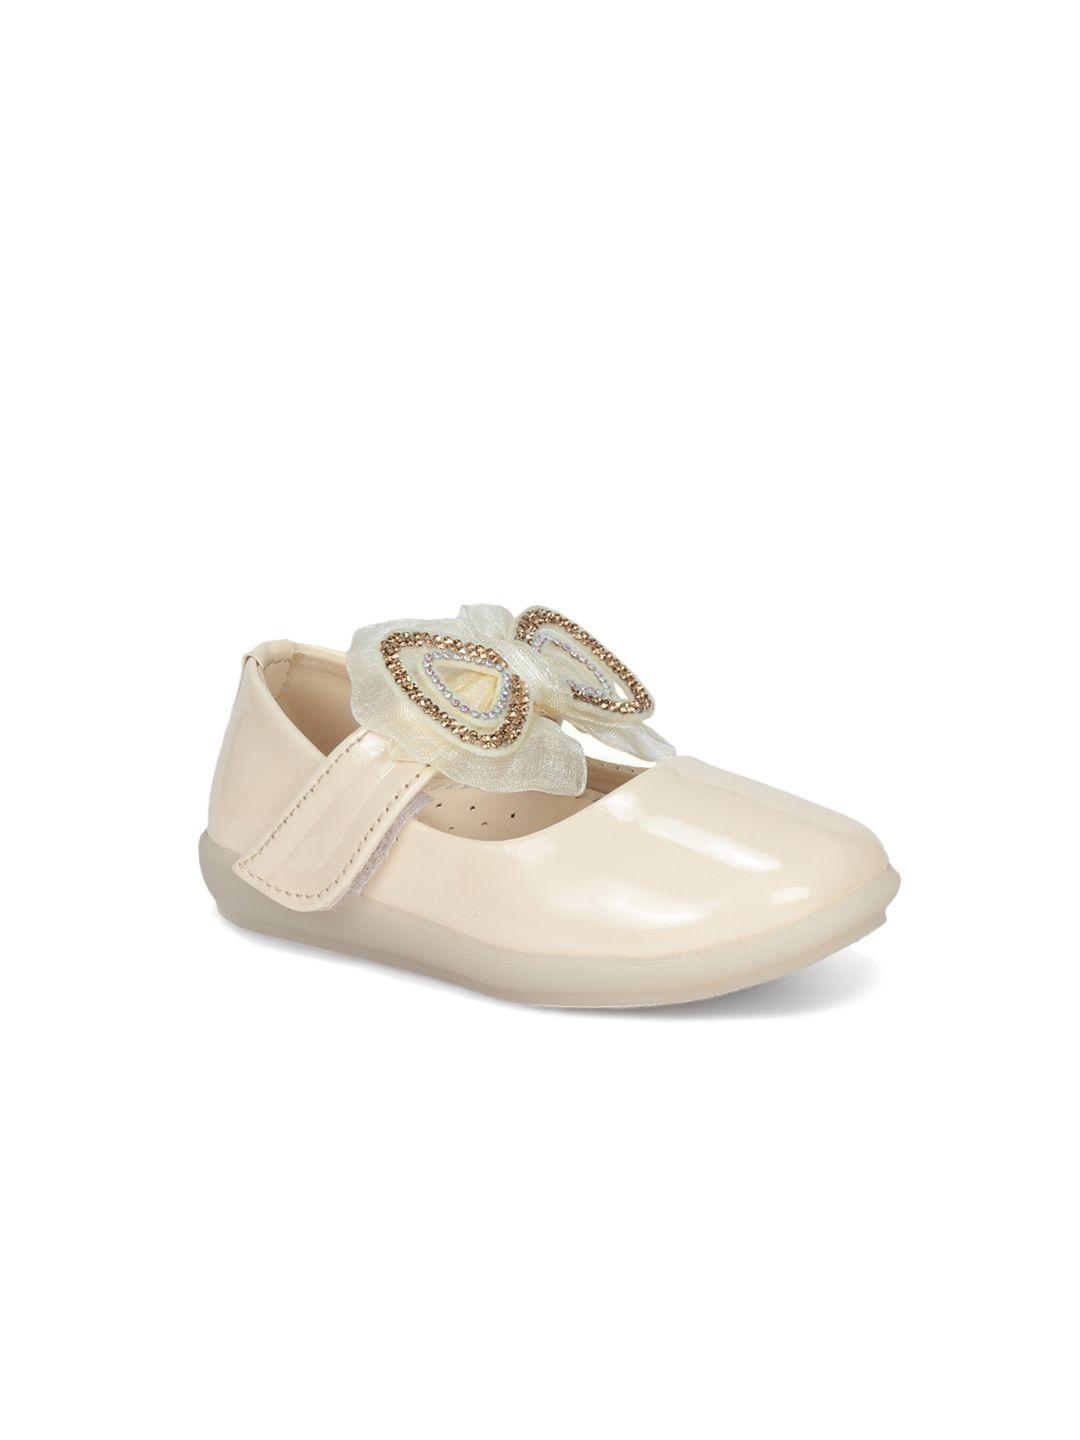 lil-lollipop-girls-embellished-bow-party-ballerinas-with-velcro-closure